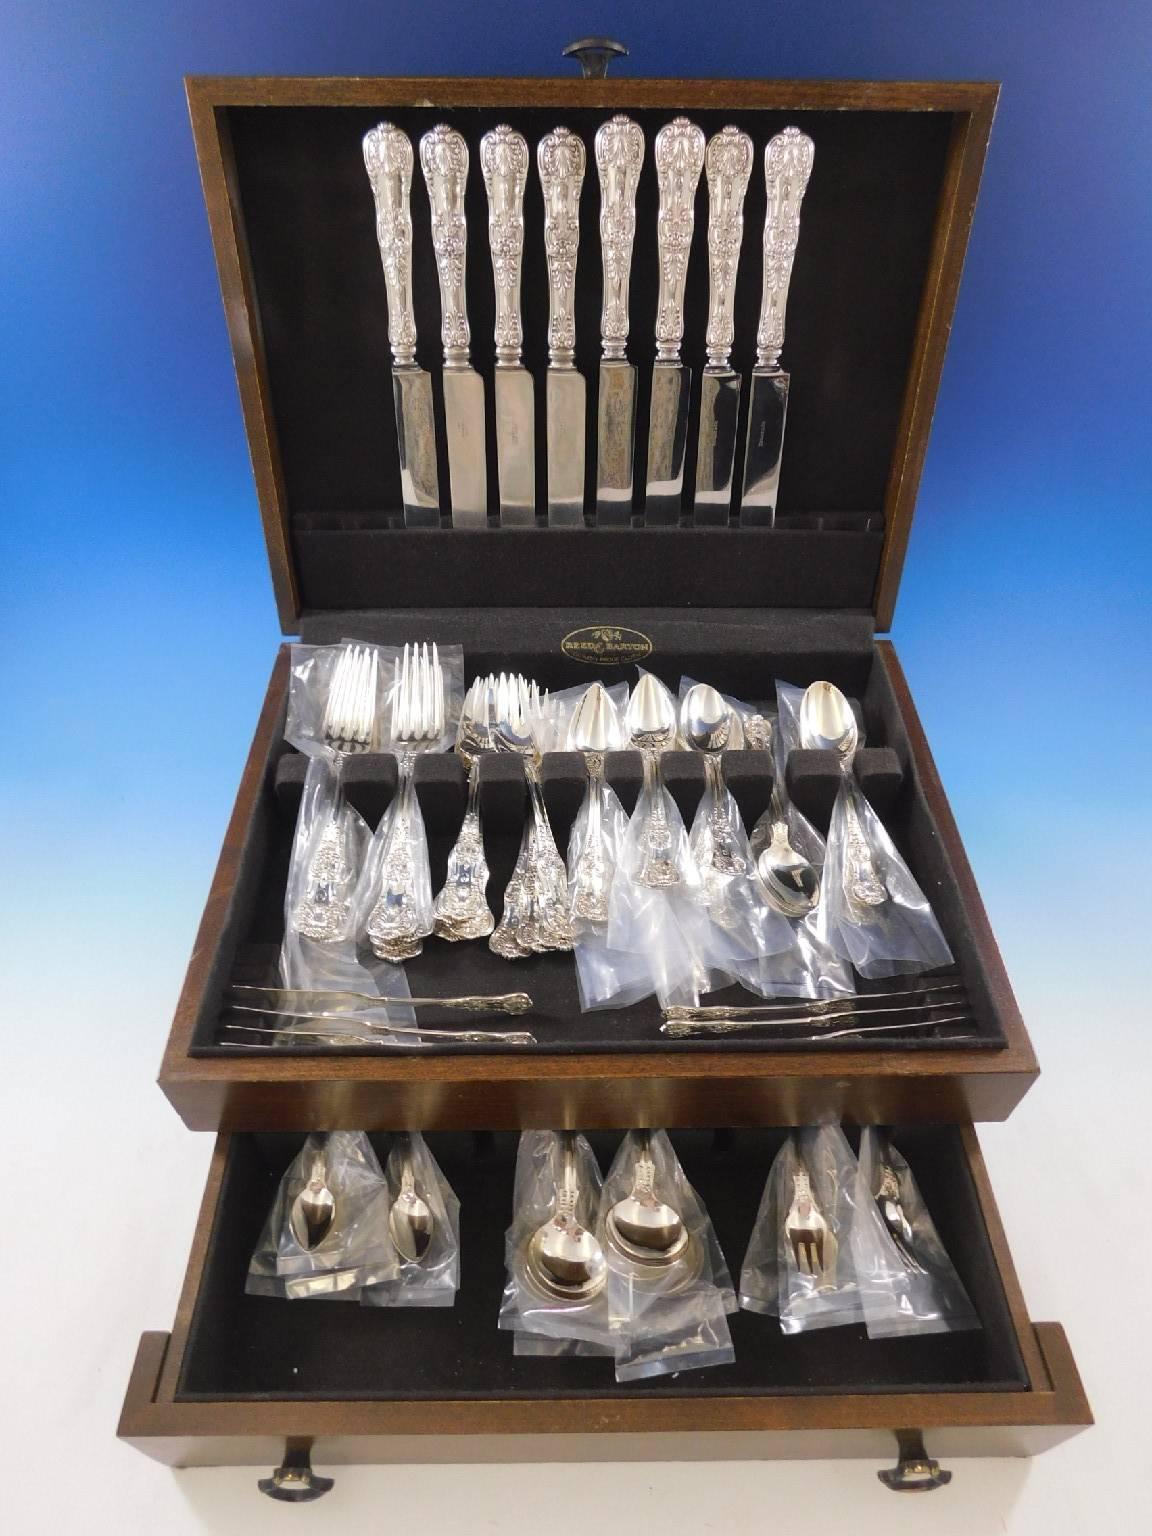 Outstanding English king by Tiffany & Co. Sterling silver dinner size flatware set - 72 pieces. This set includes:

Eight dinner size knives, 10 1/4